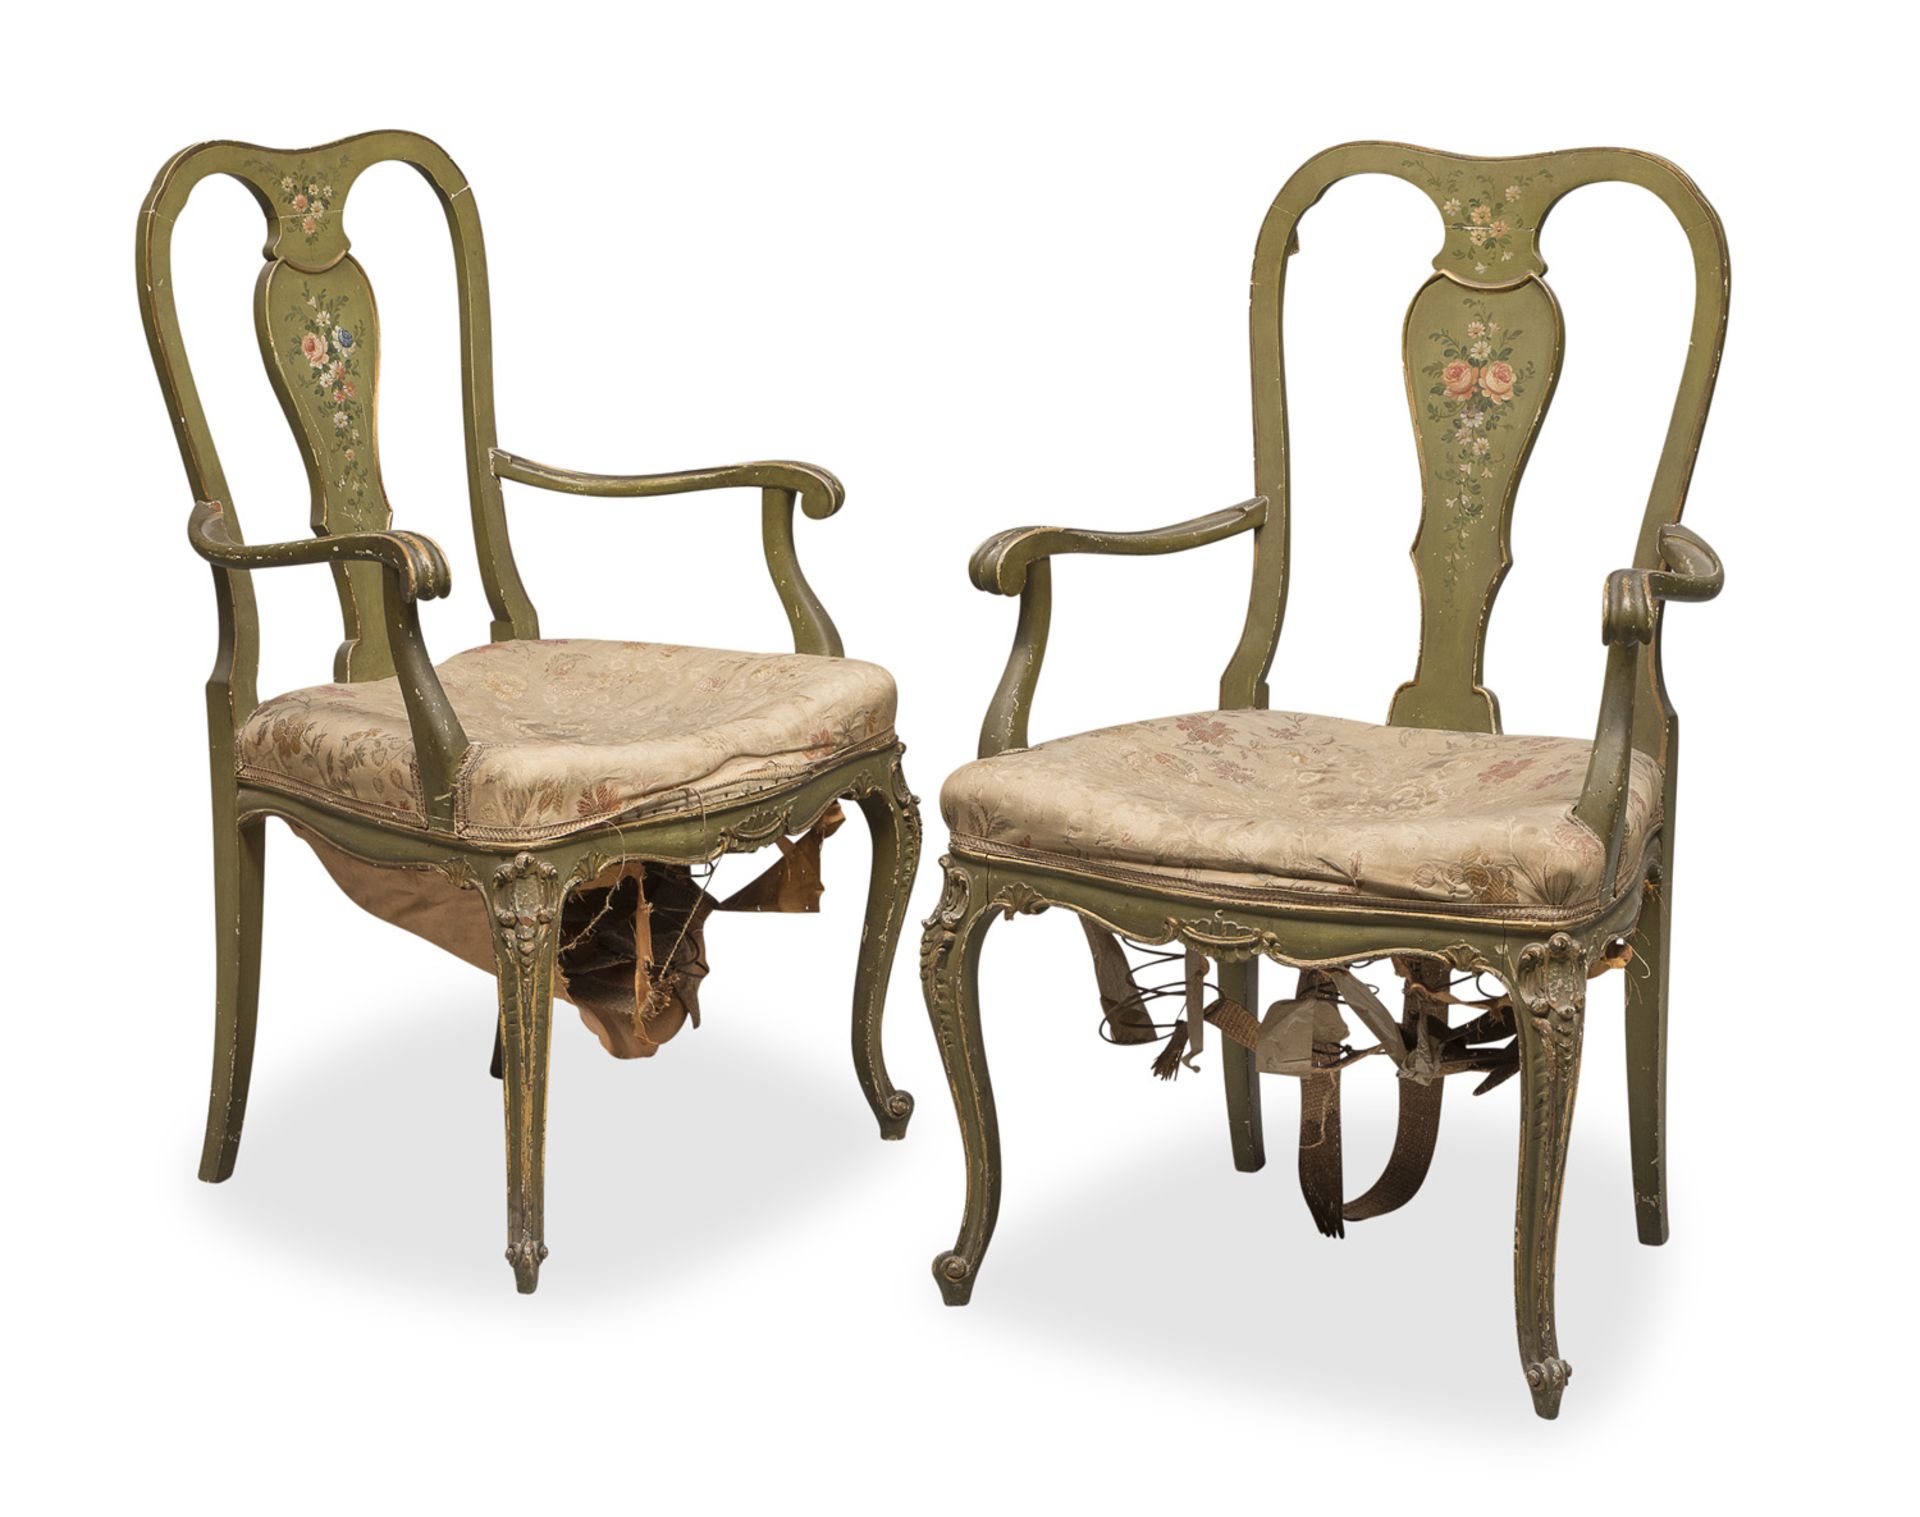 PAIR OF ARMCHAIRS IN LACQUERED WOOD 19TH CENTURY